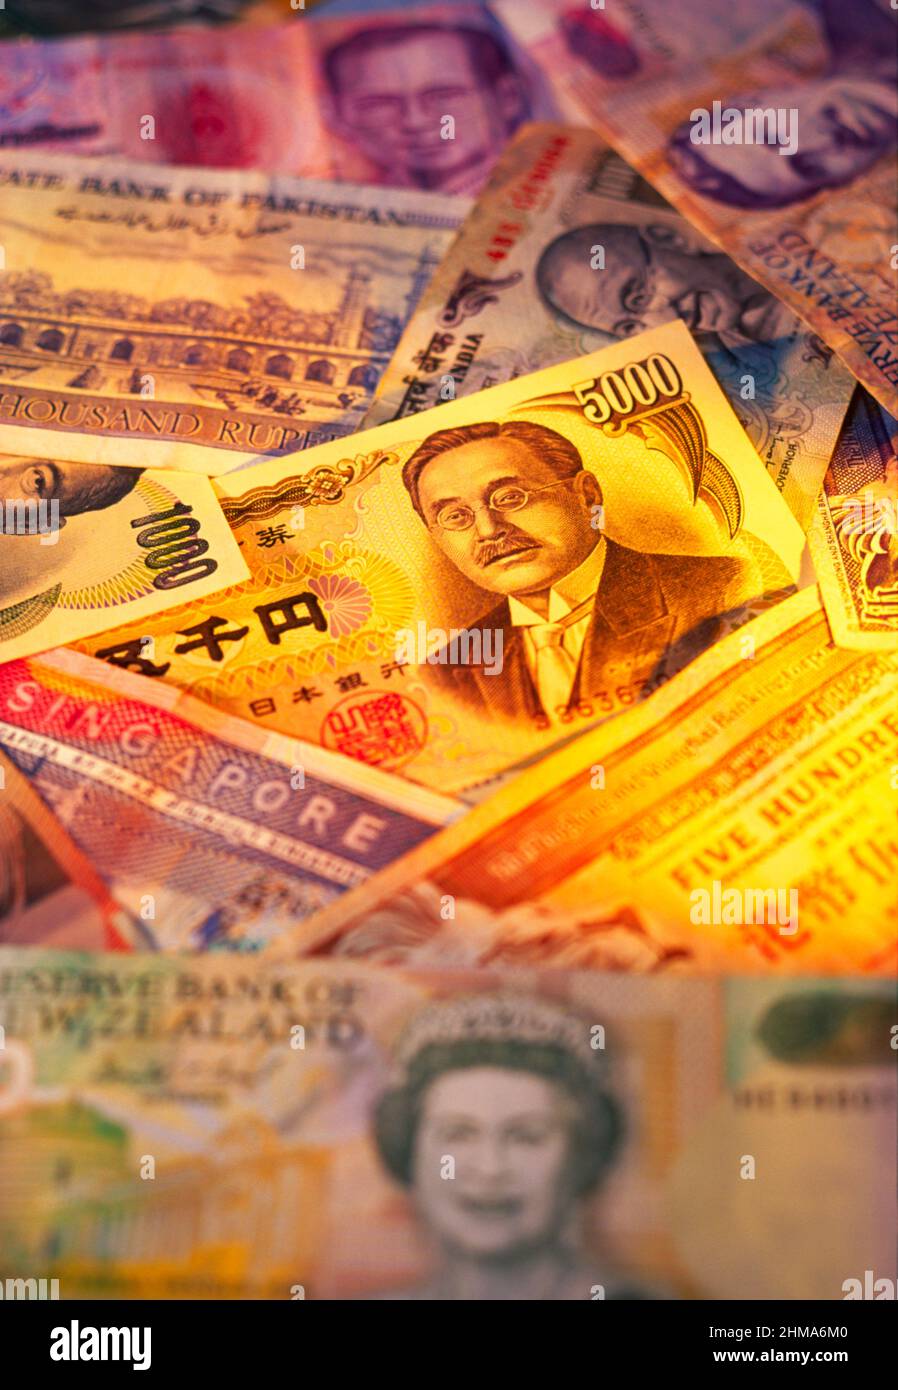 currencies of Asia and Oceana, Stock Photo